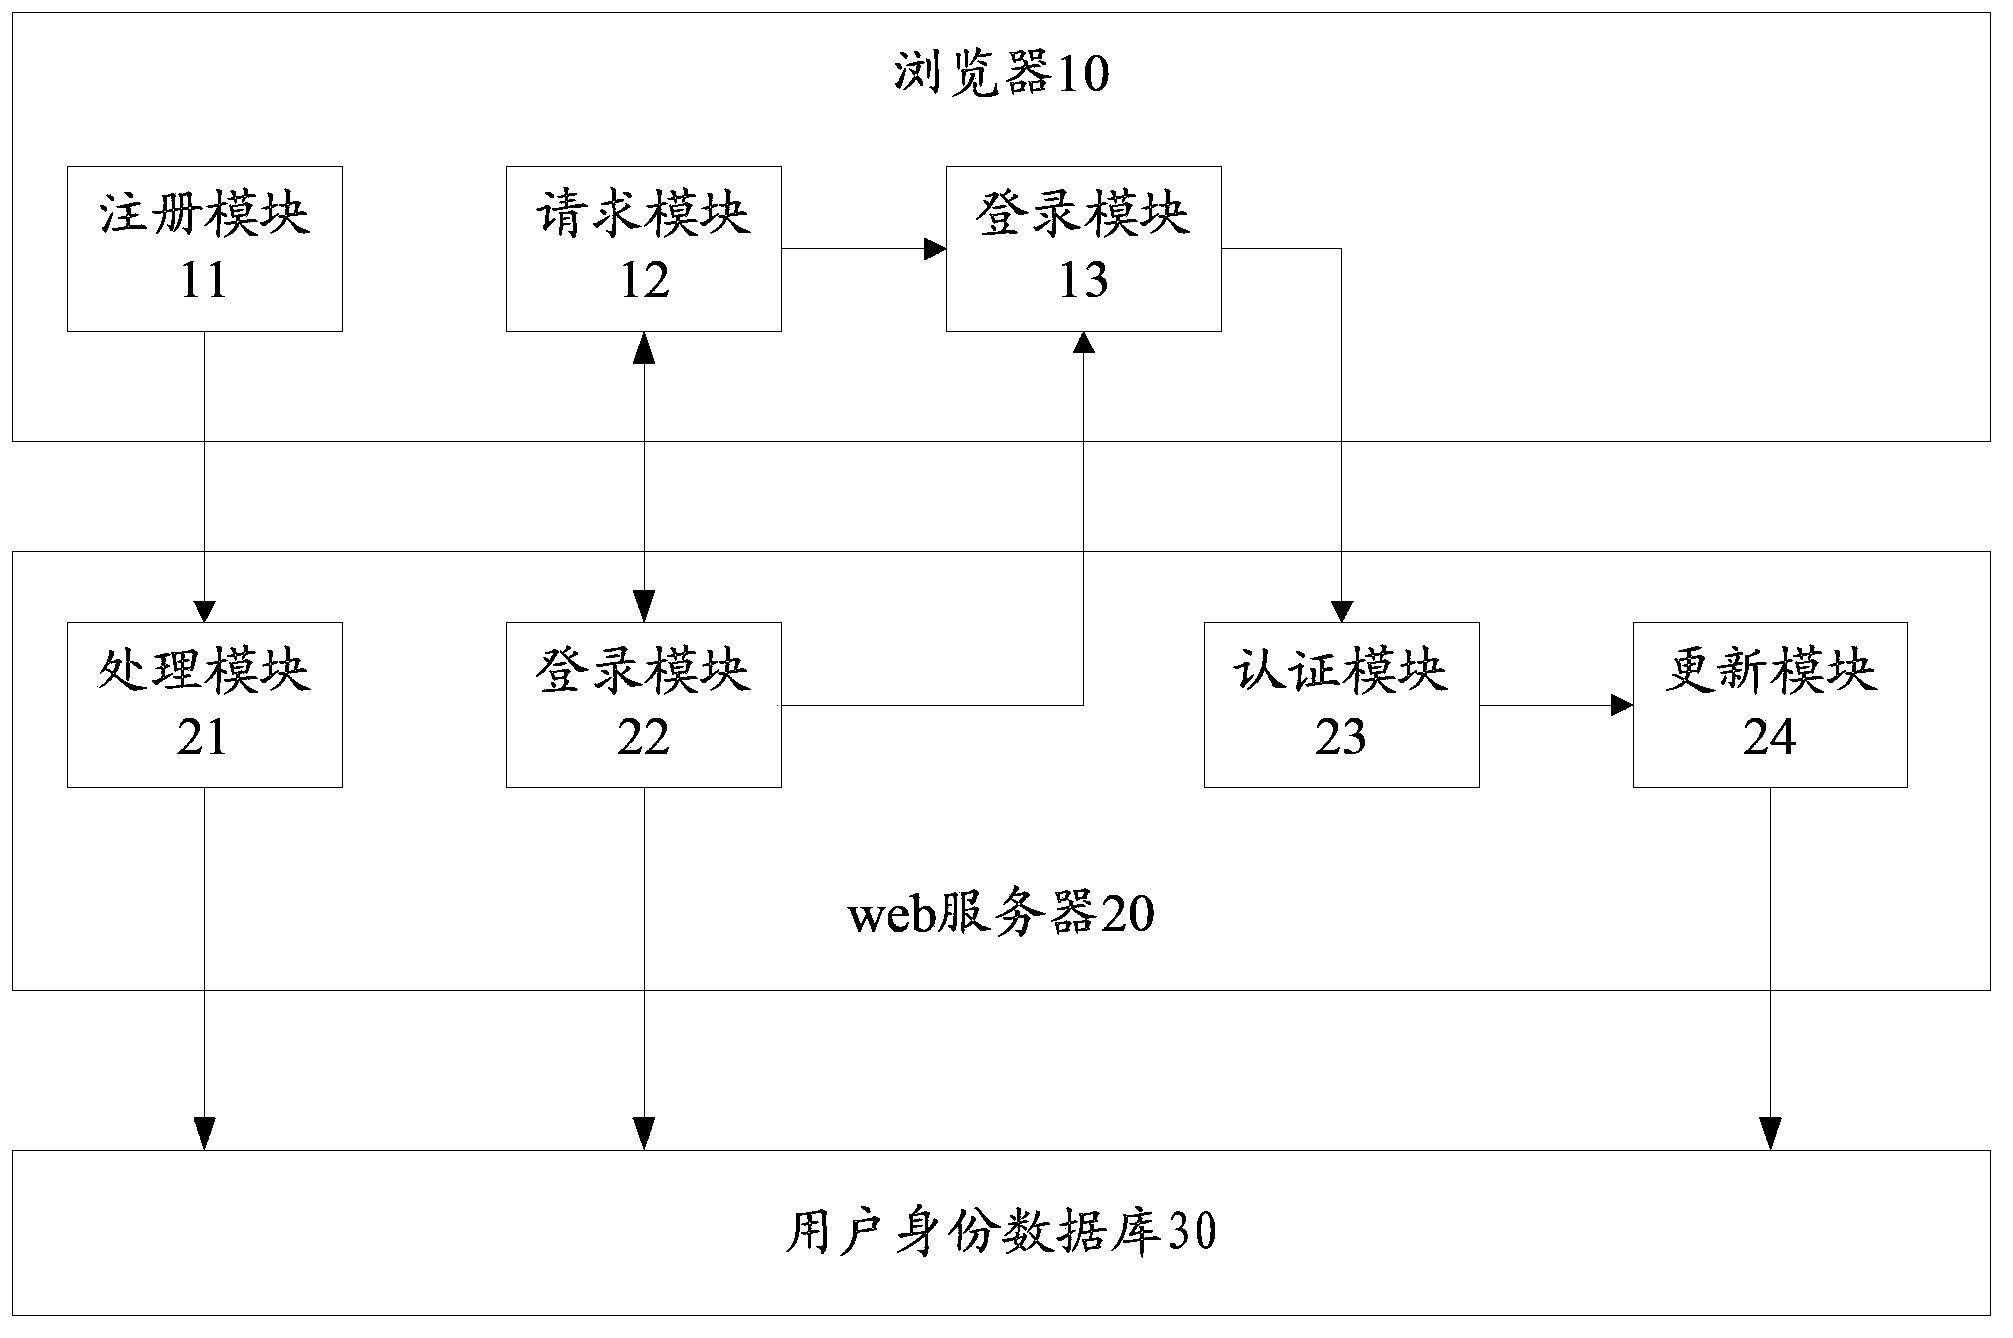 Log-in authentication method and system on web application